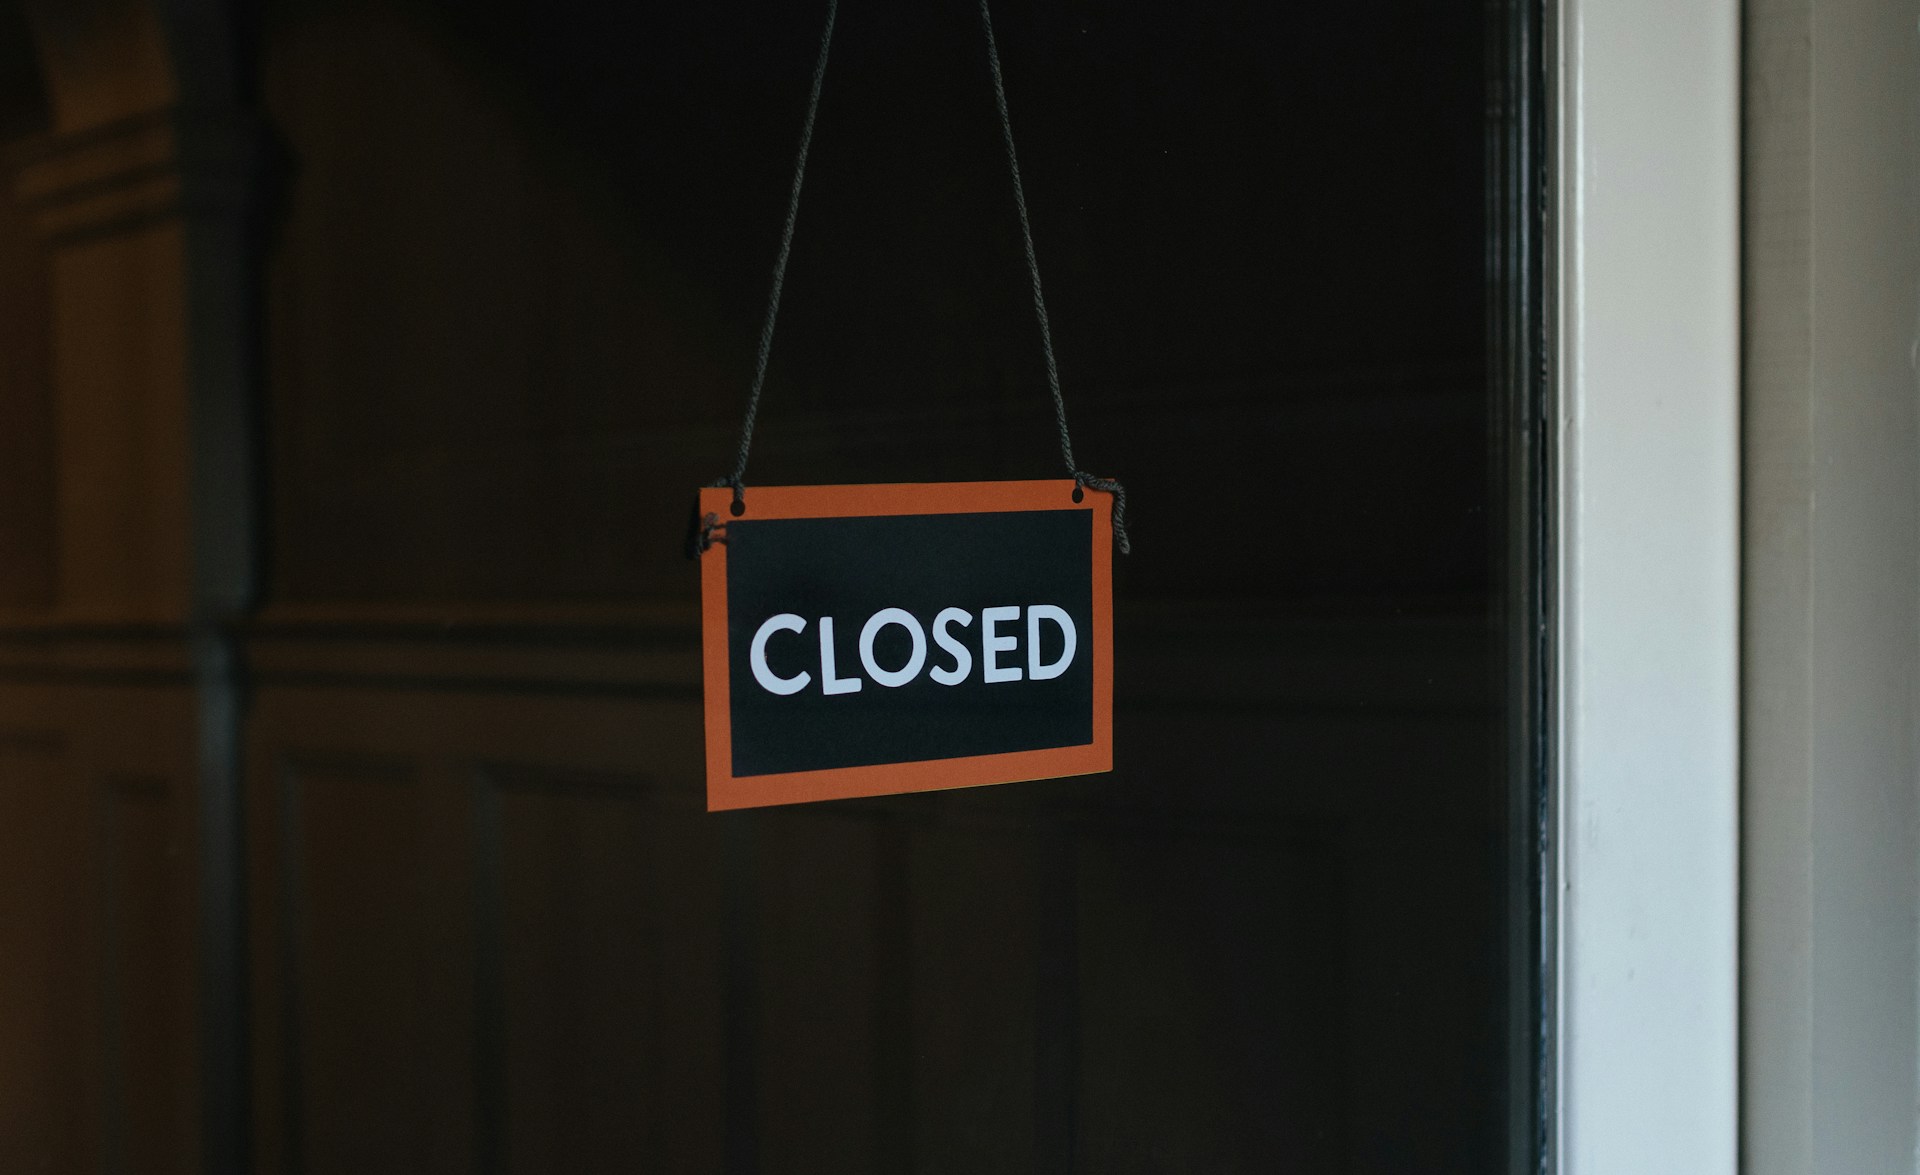 UK-based prop trading firm Stocknet Institute announces closure, joining recent industry shutdowns. Learn about their winding down process and impact on clients.